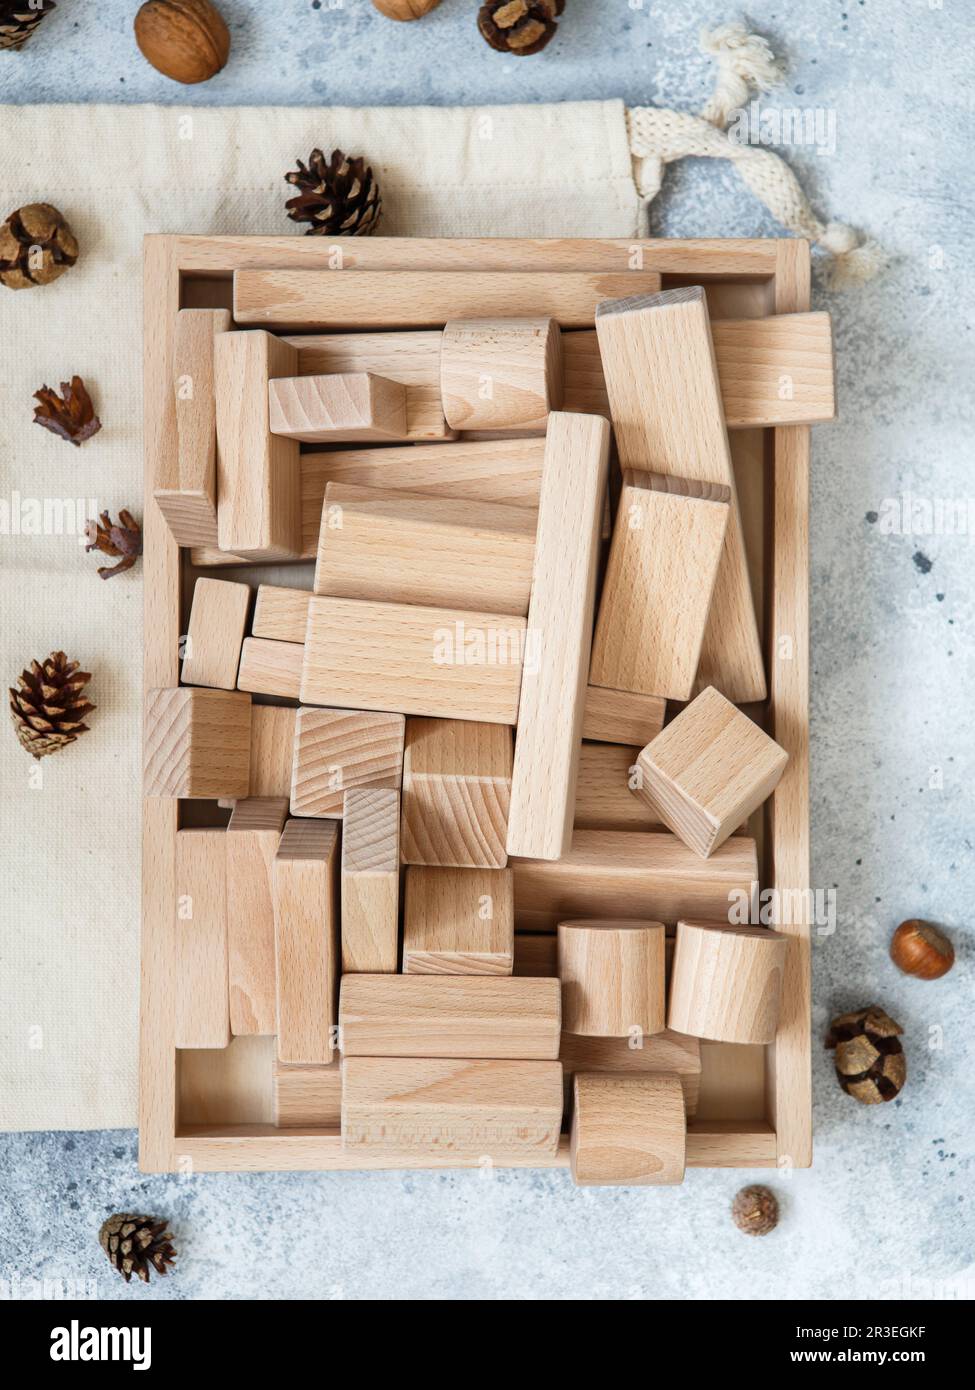 Wooden Toy Construction with ecologically wooden blocks manufactured from sustainable timbers. Wood Stock Photo